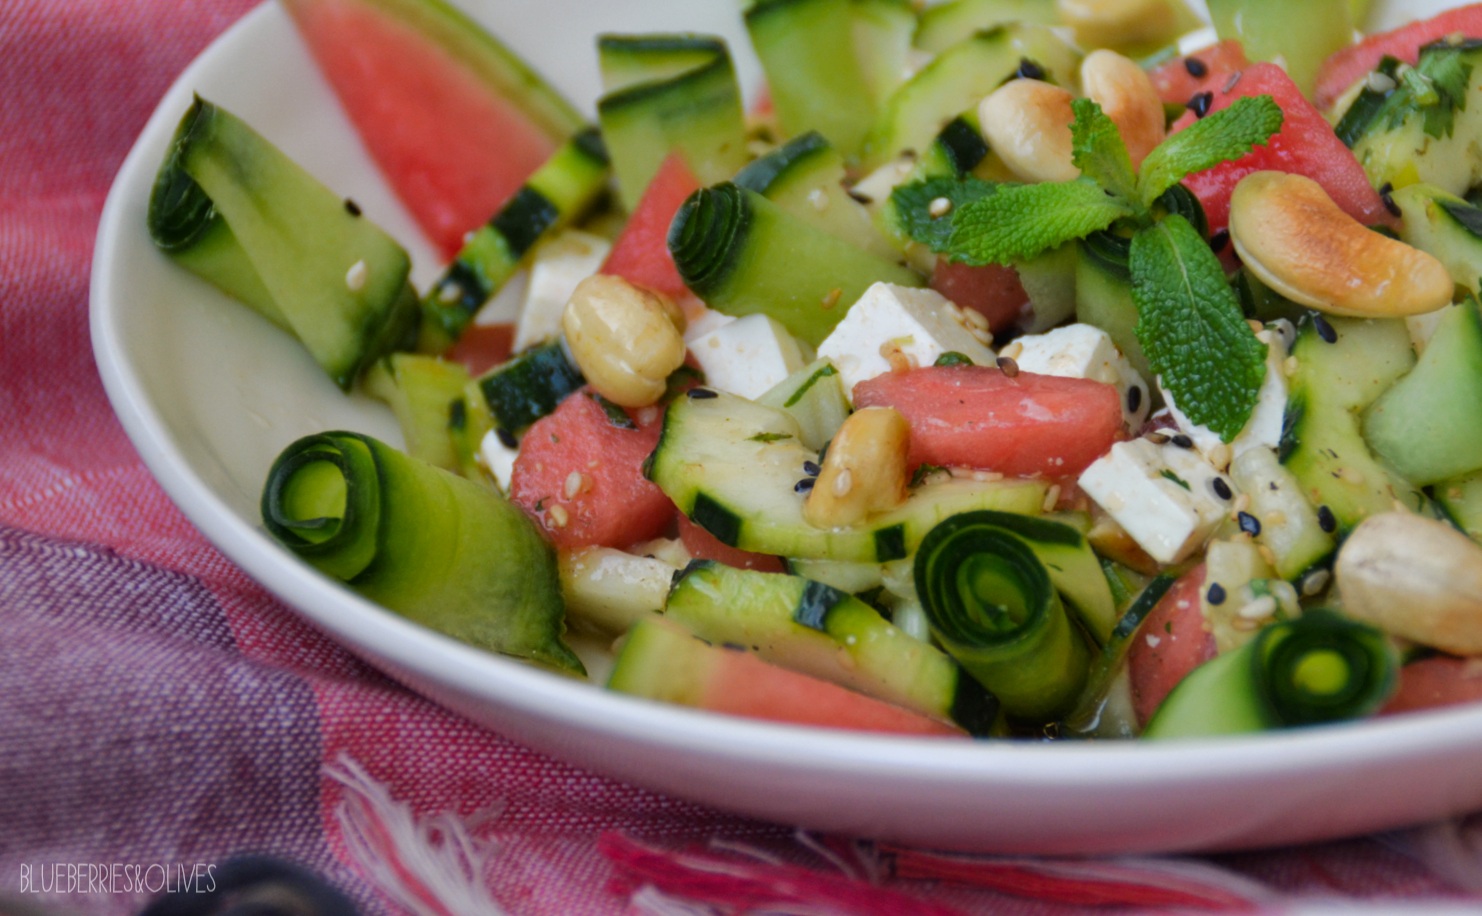 CUCUMBER AND WATERMELON SALAD WITH ASIAN DRESSING